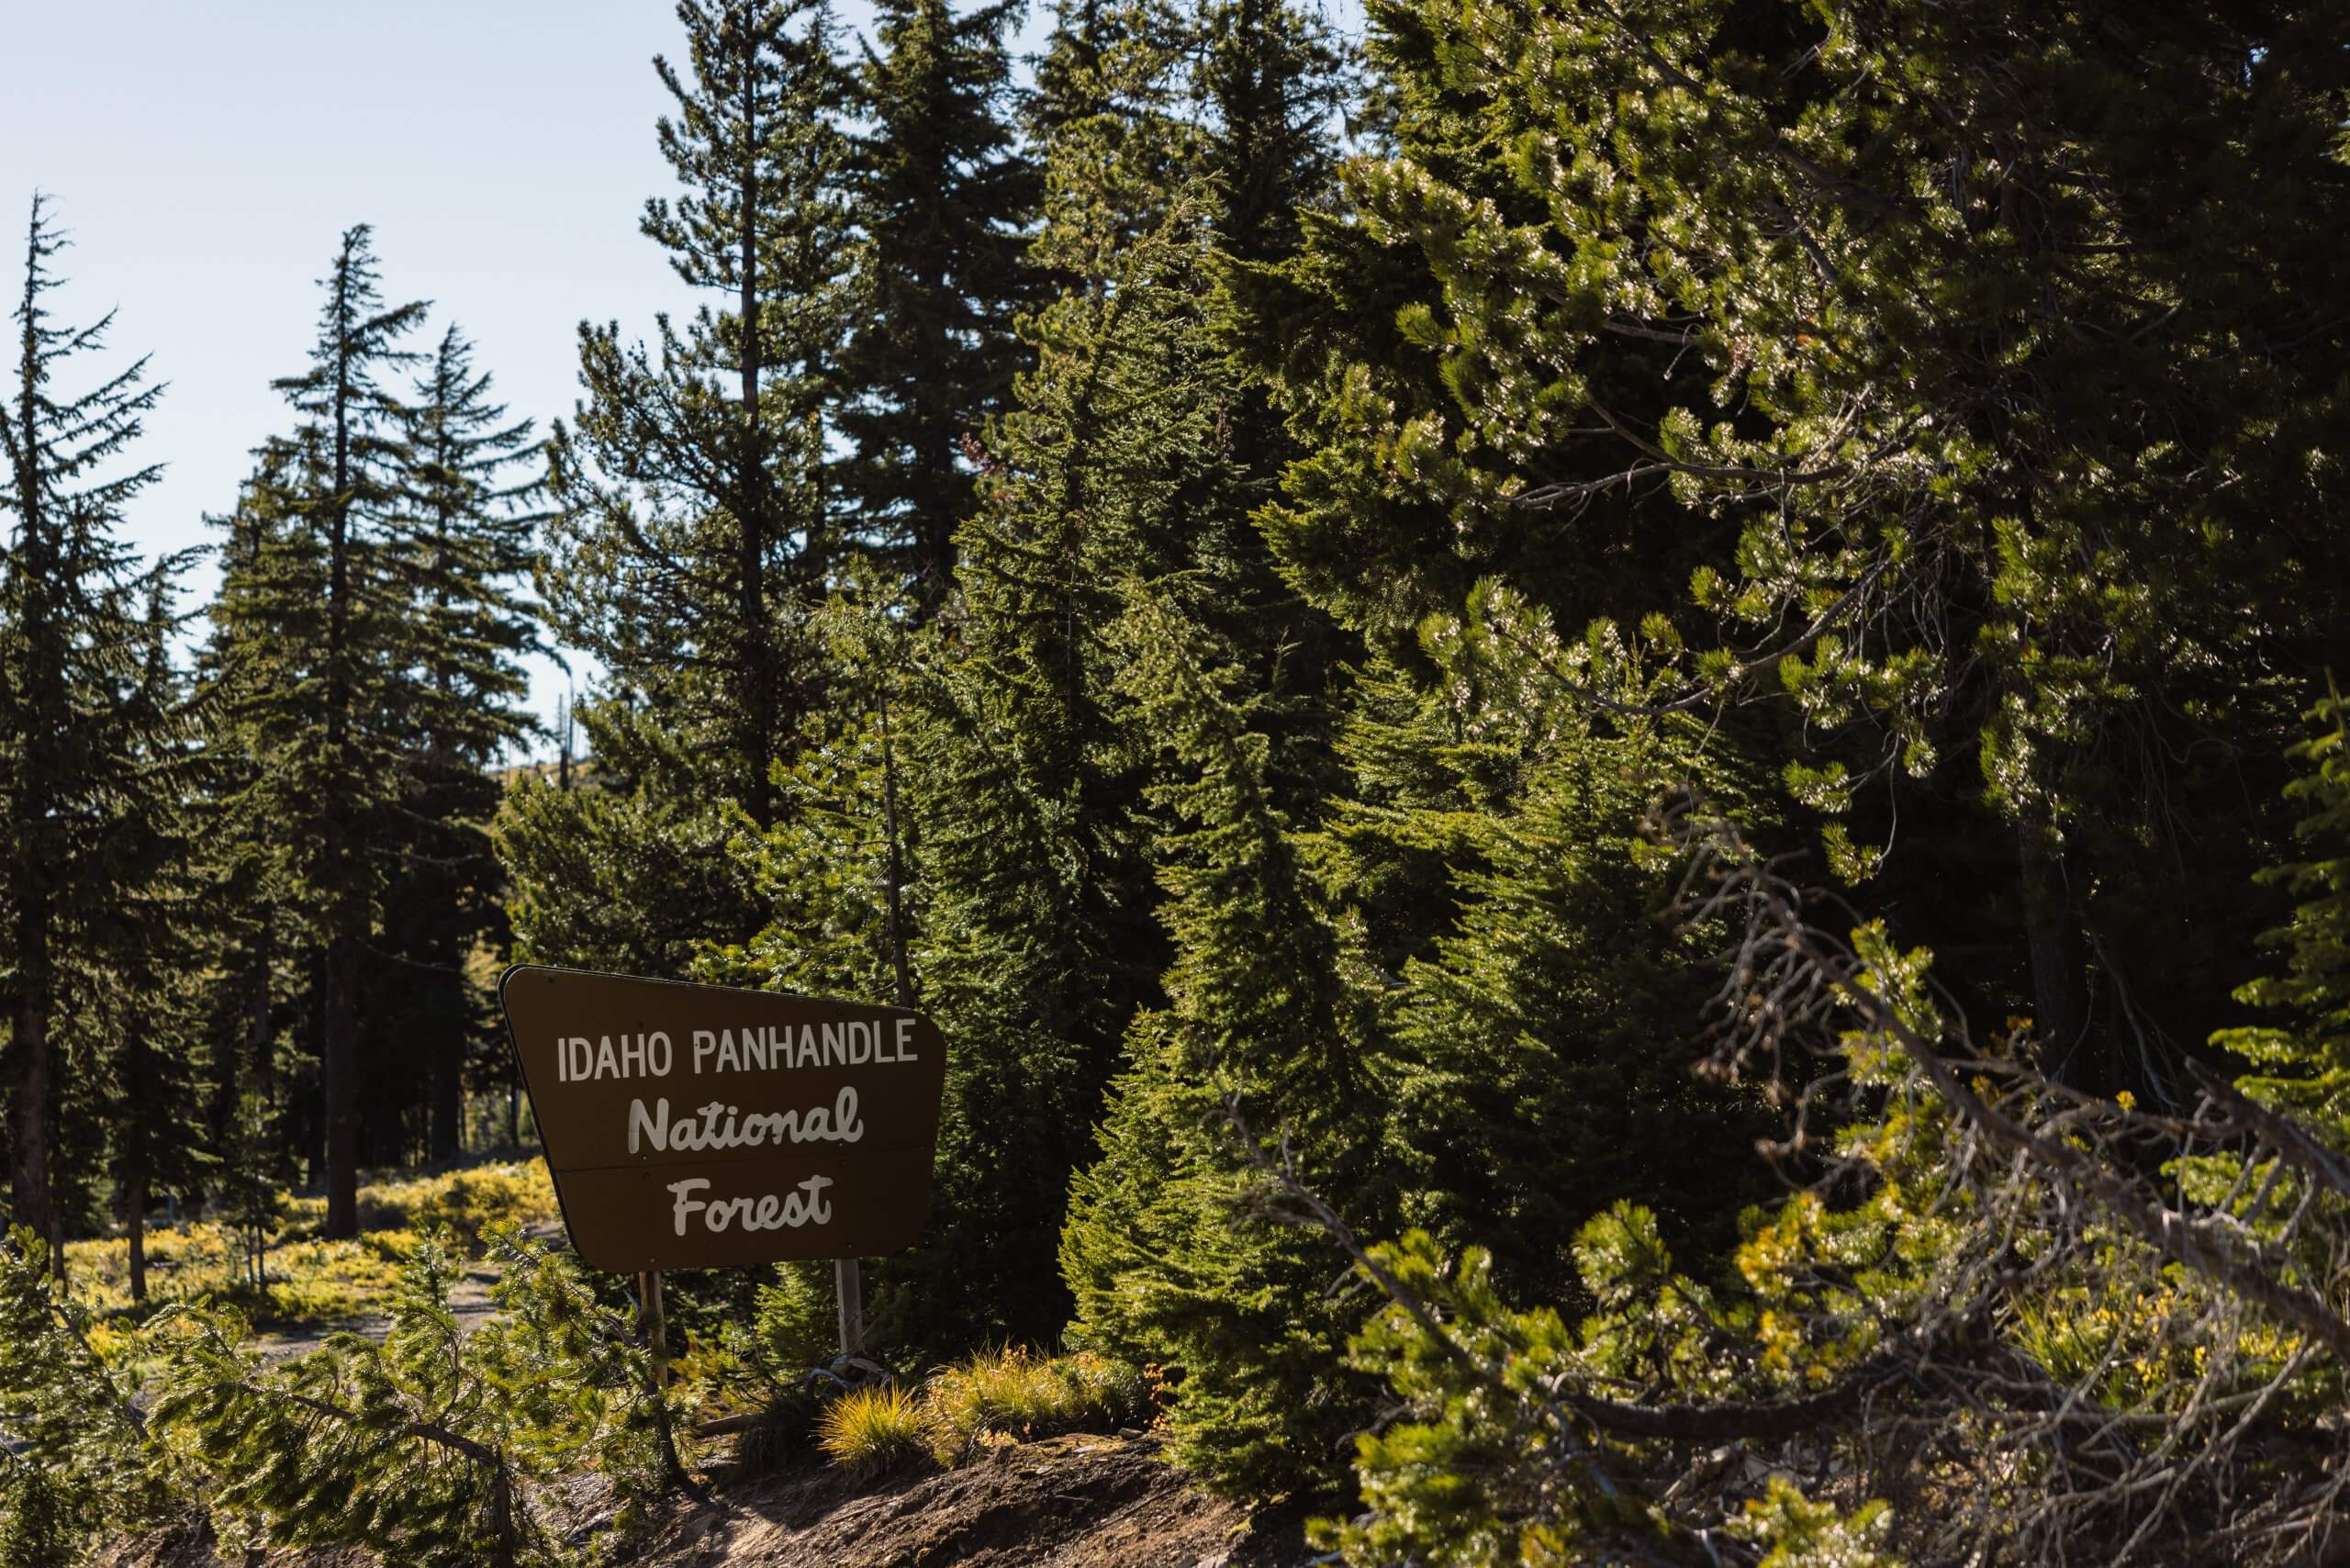 Idaho Panhandle National Forest sign.